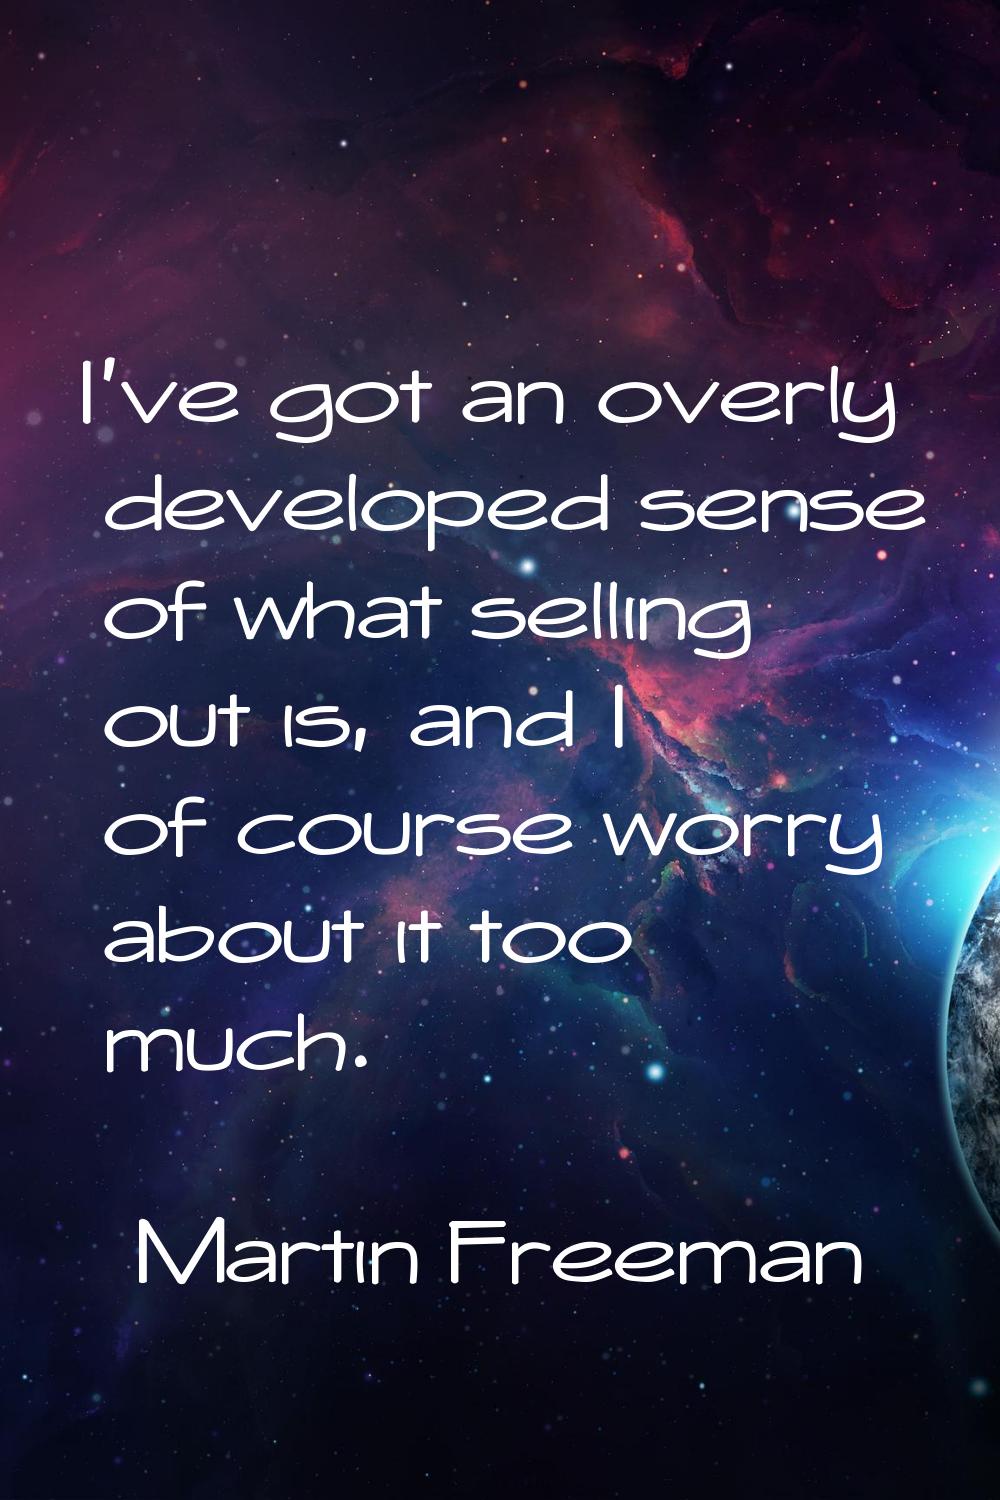 I've got an overly developed sense of what selling out is, and I of course worry about it too much.